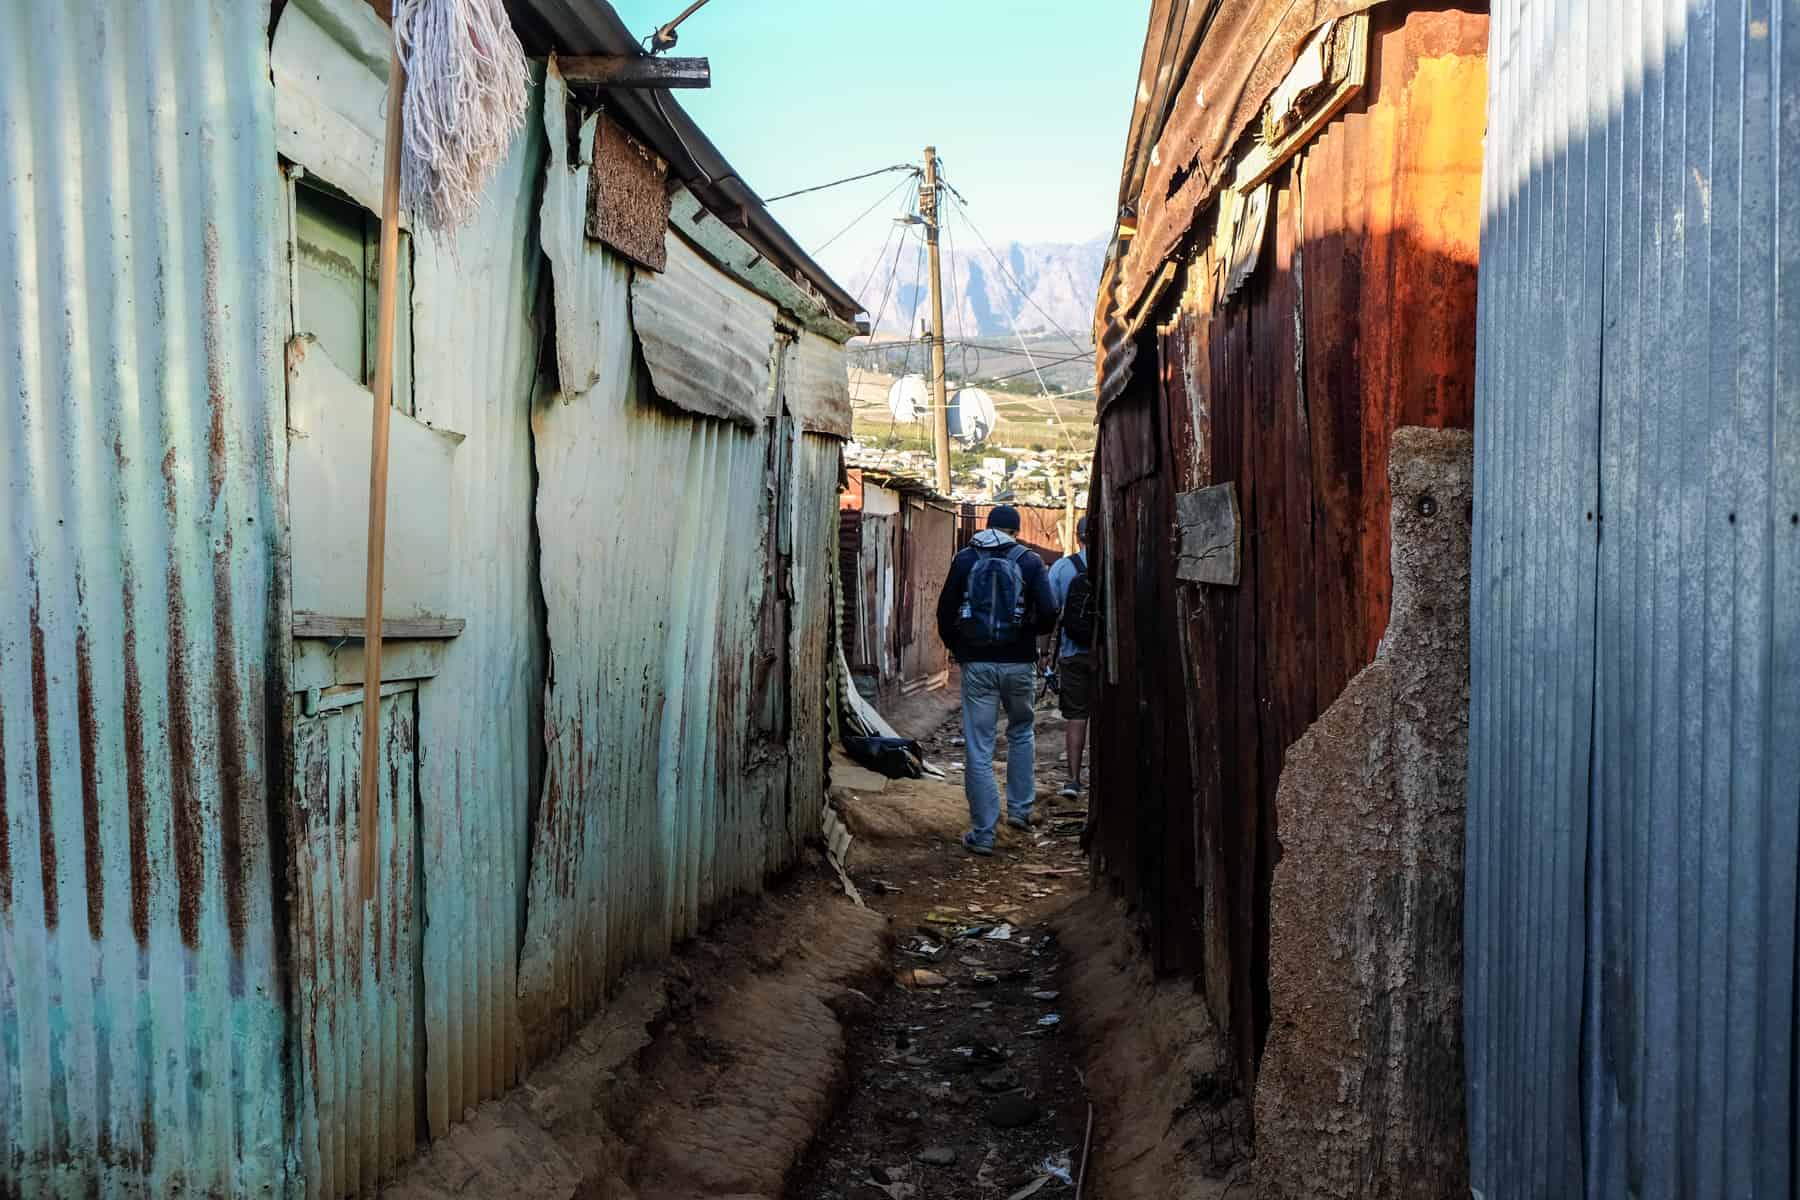 A man with a backpack walks down a narrow, dirt track between rows of light green and blue painted metal houses in the Kayamandi township in South Africa